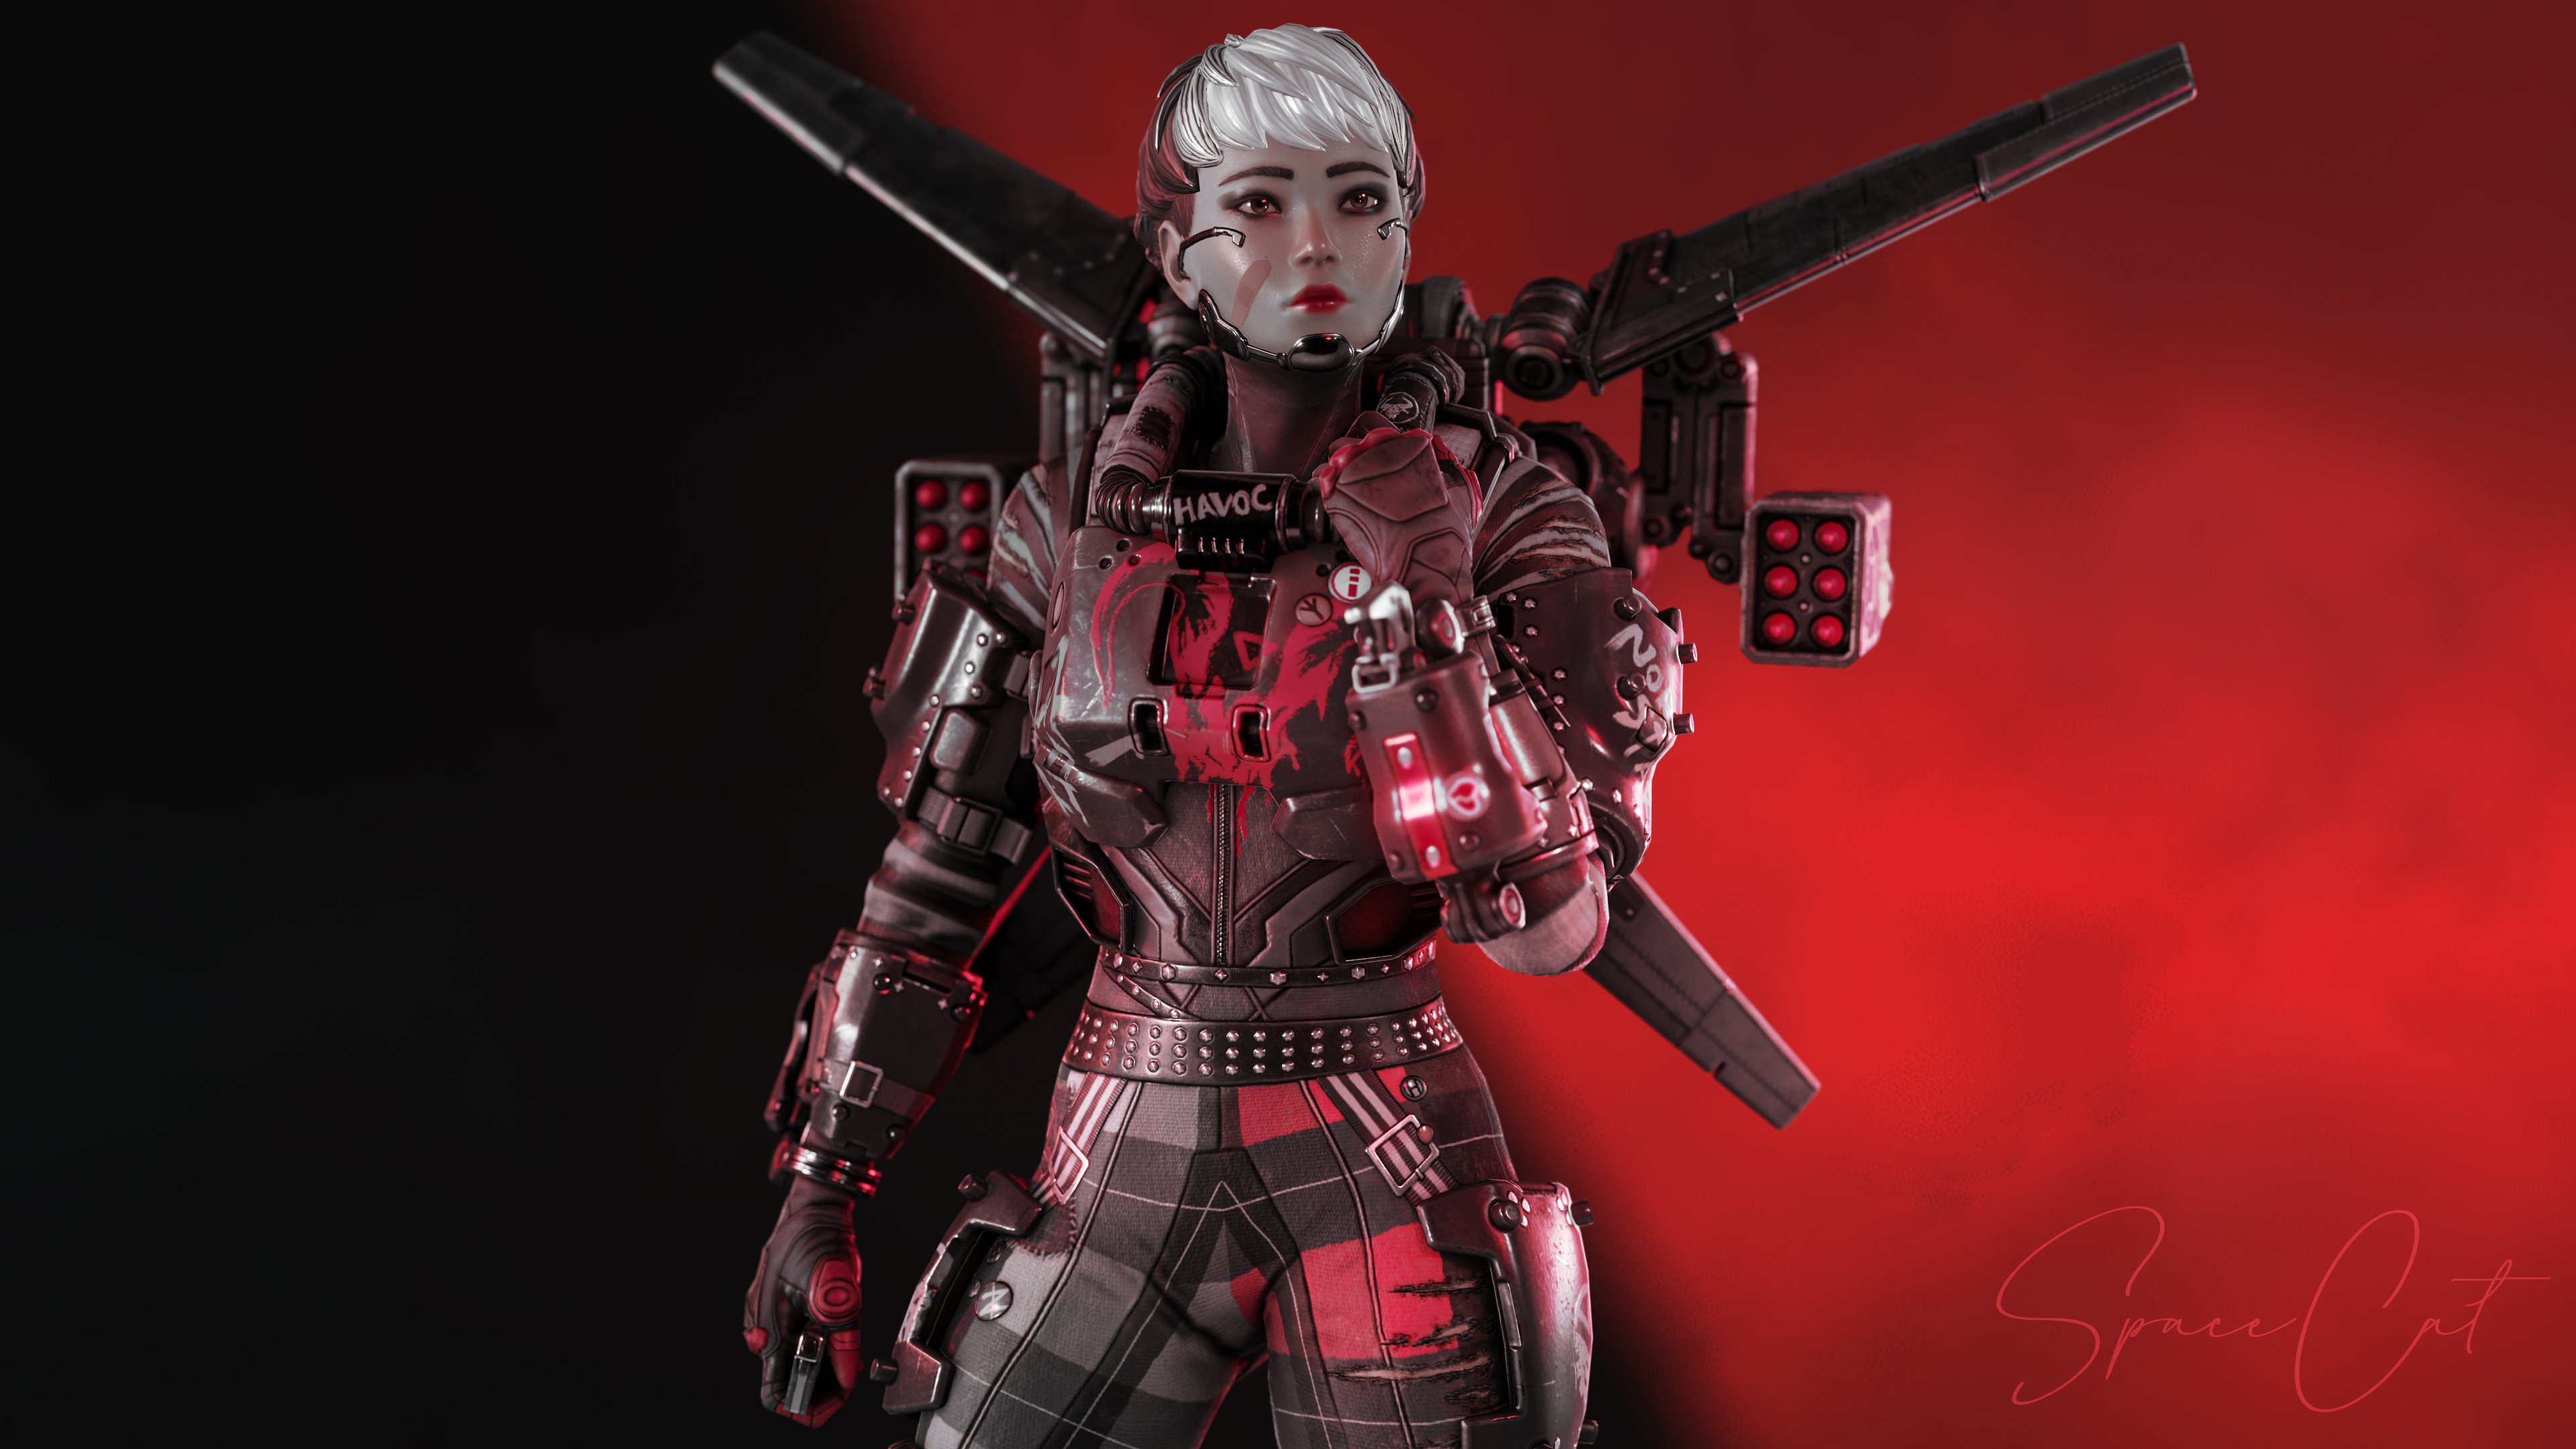 Valkyrie Apex Legends Wallpapers  Wallpaper Cave